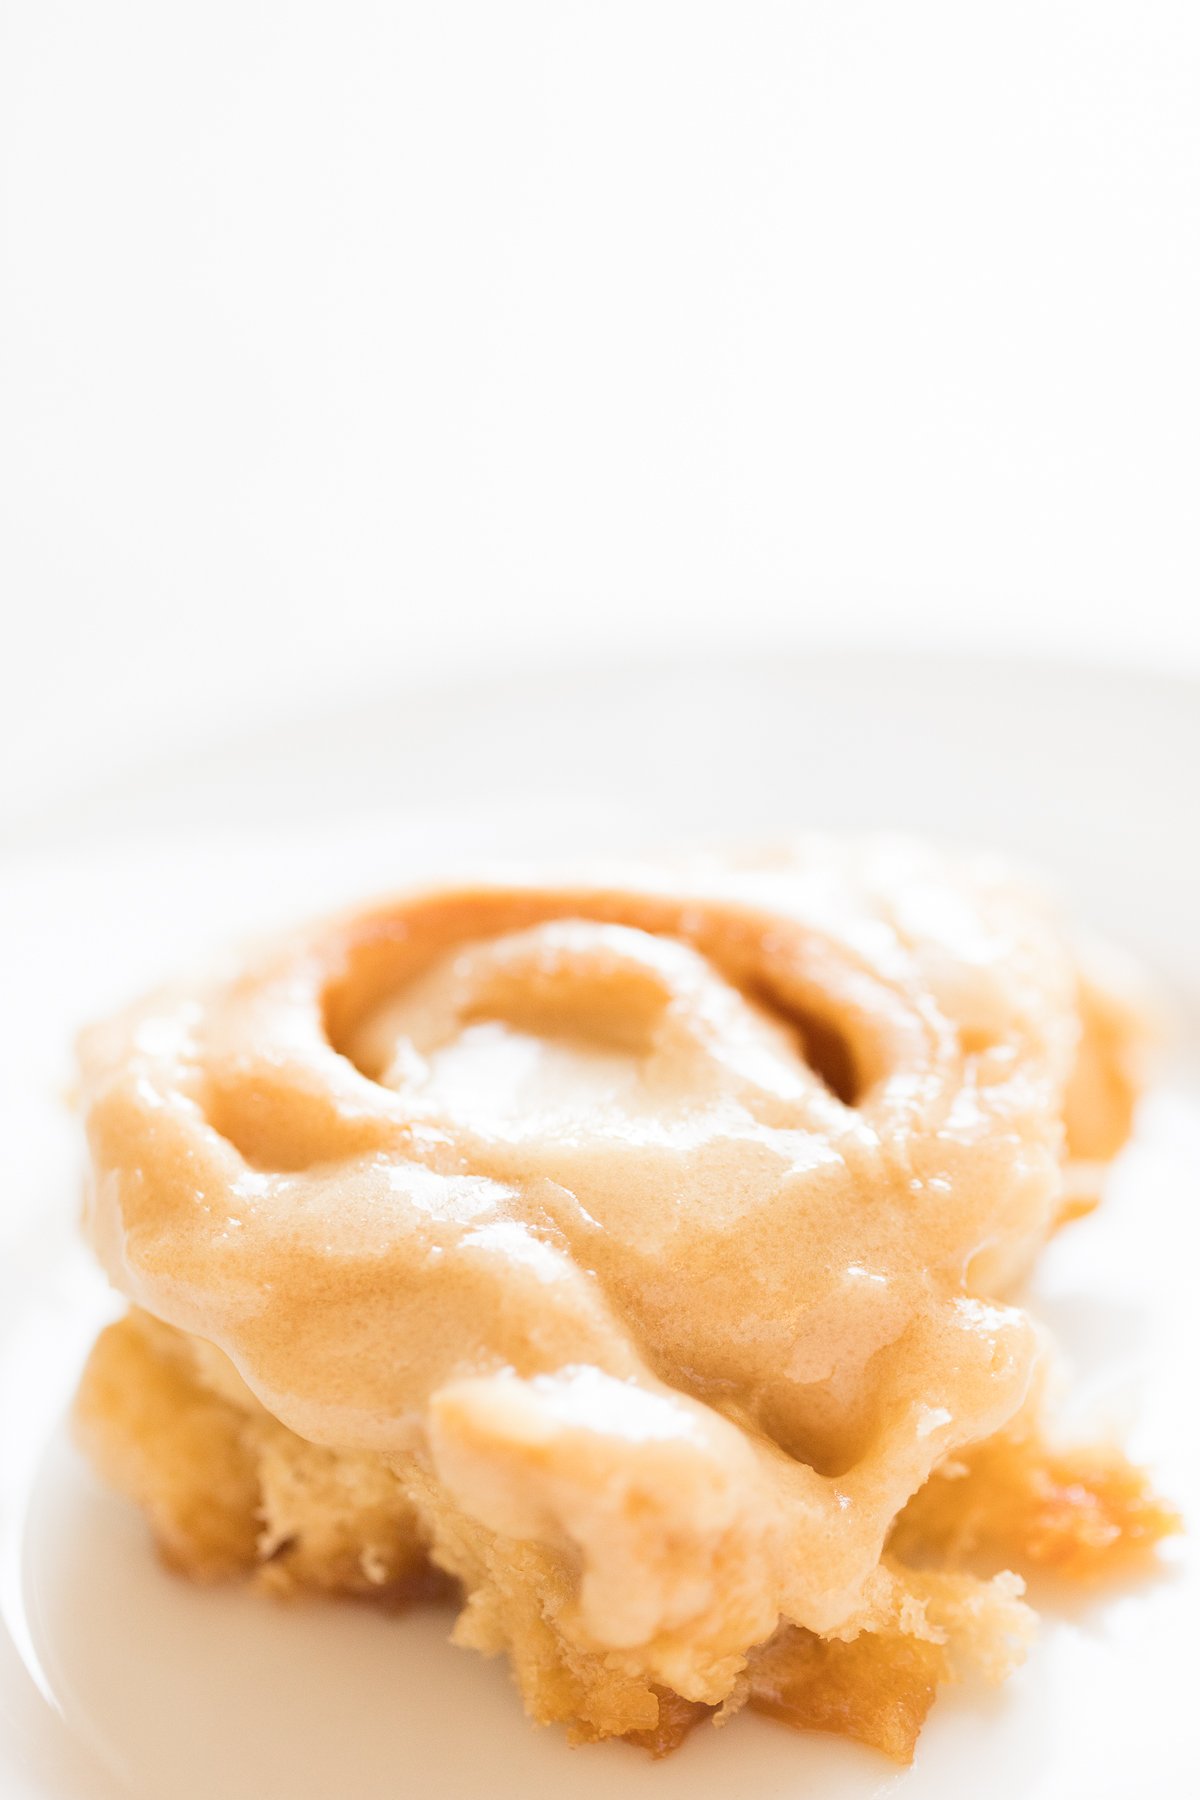 A piece of caramel roll on a white plate.